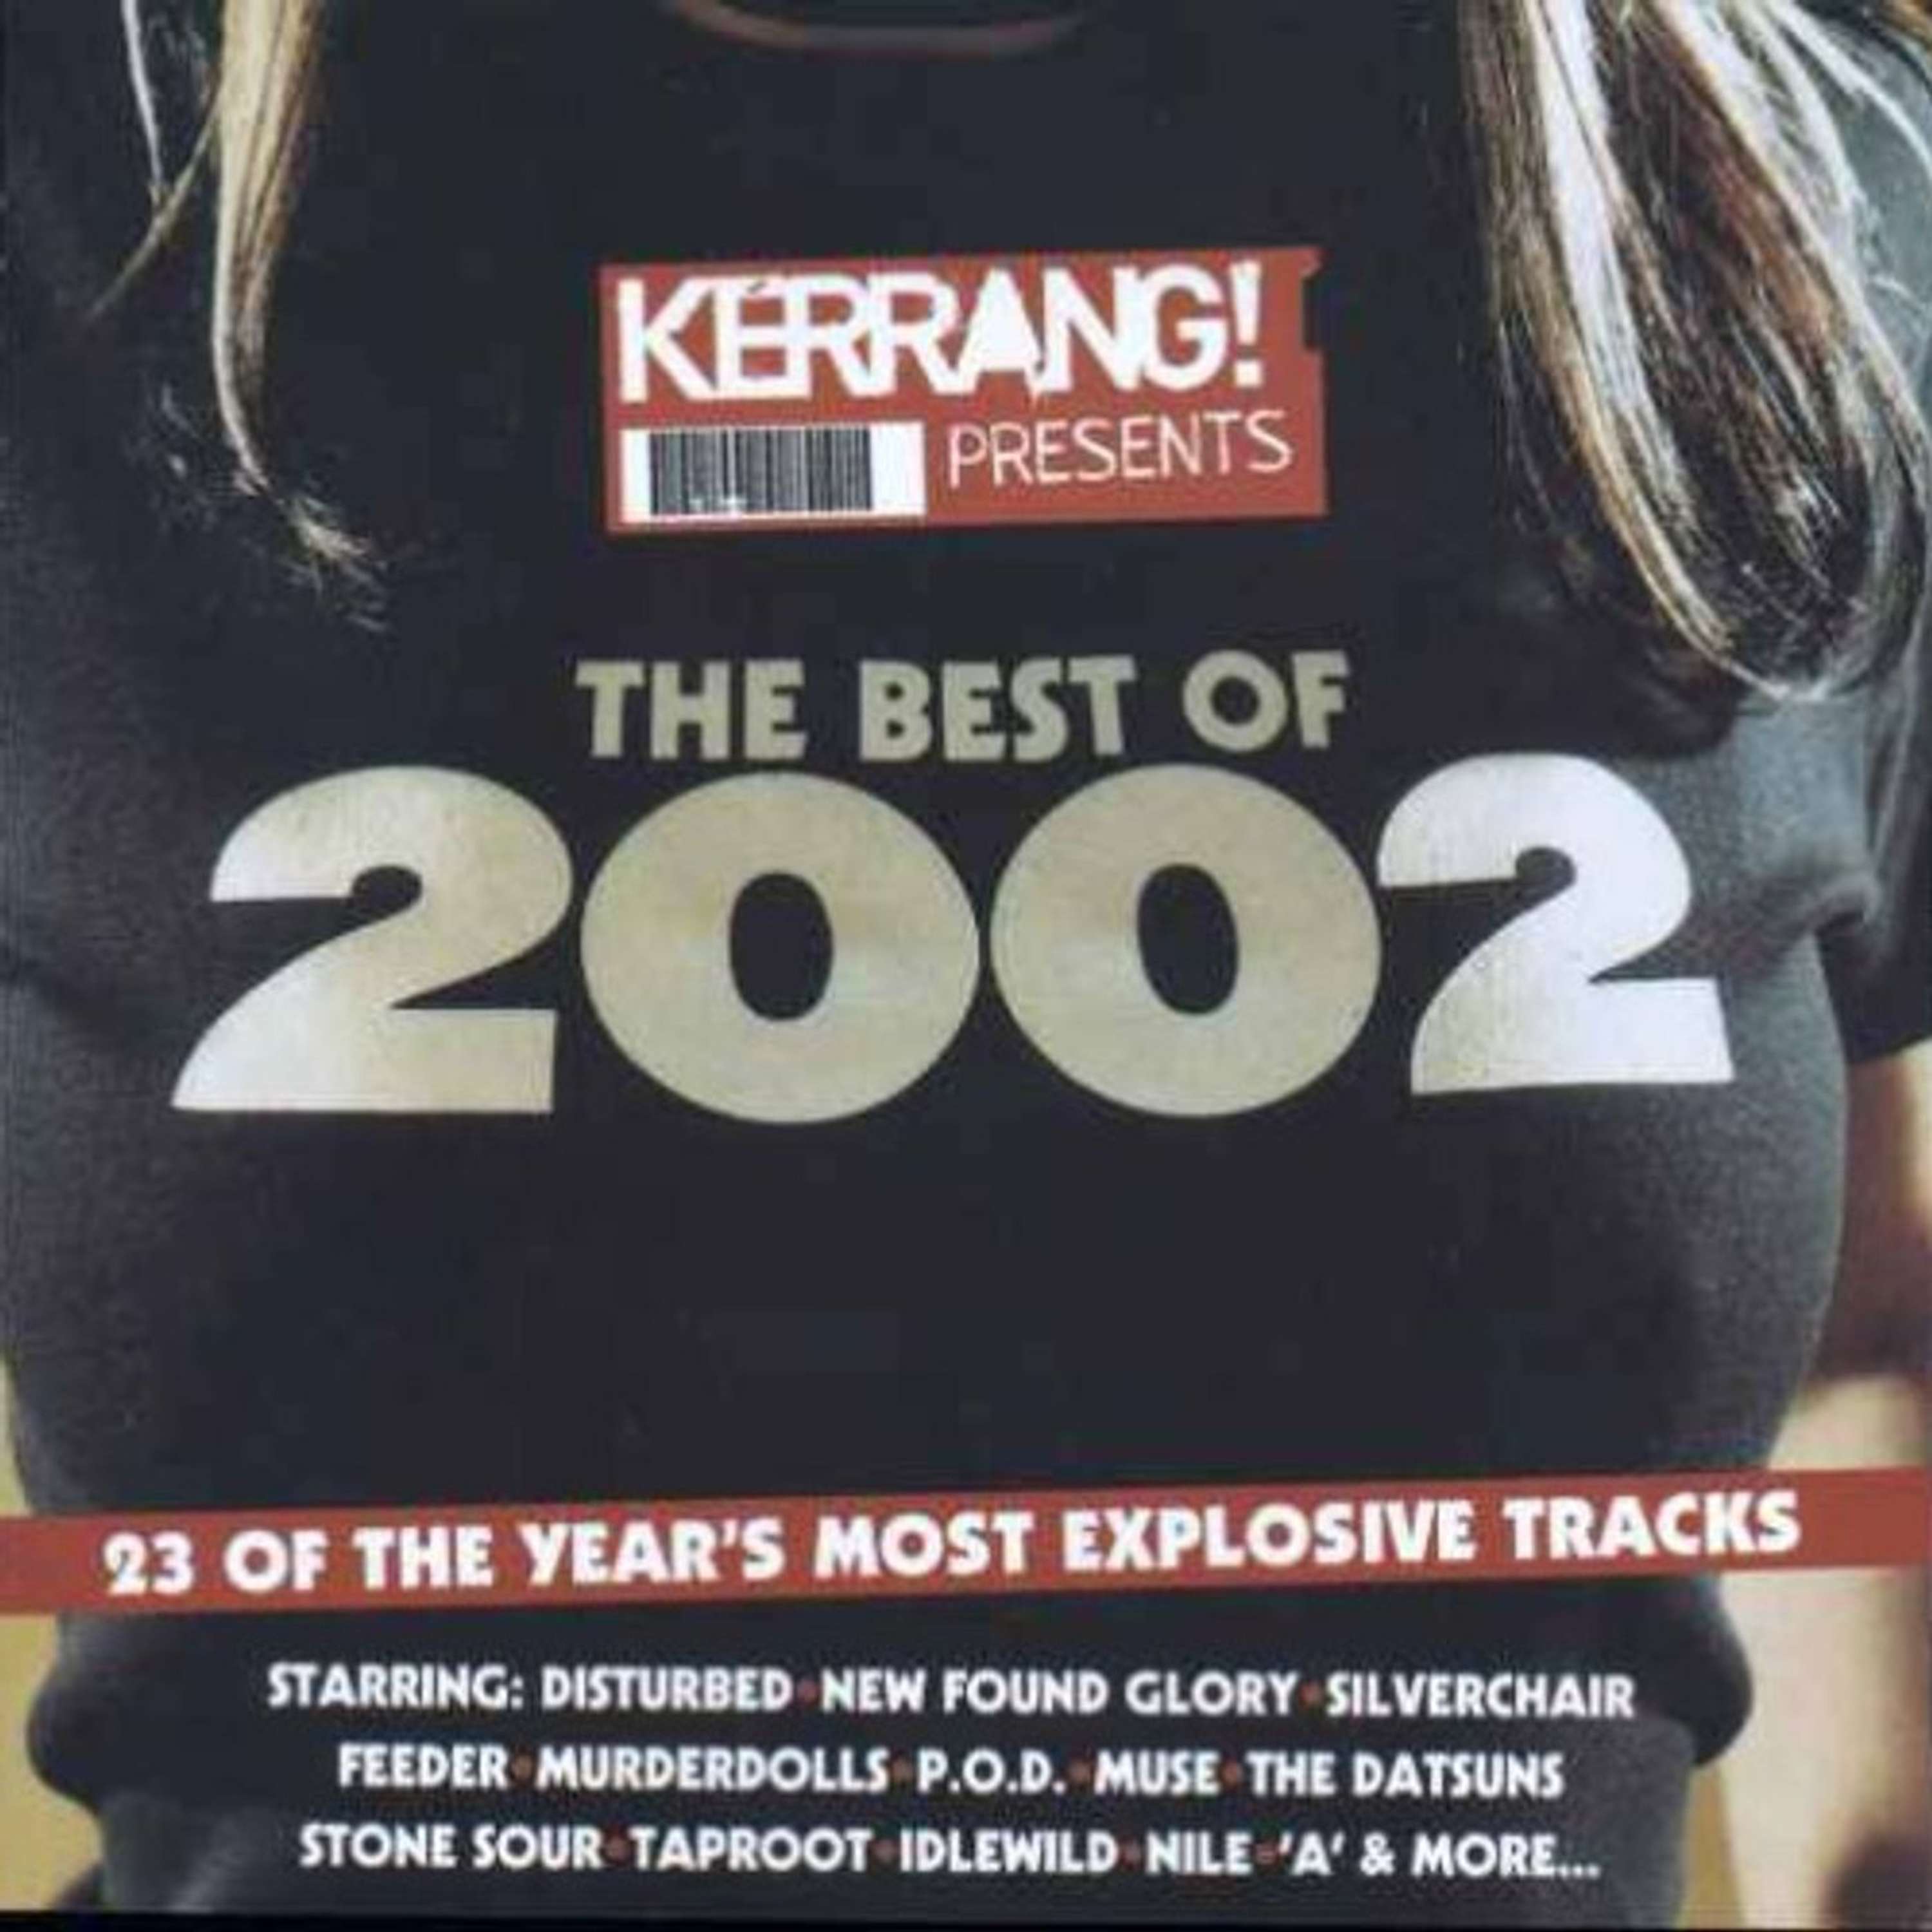 Free With This Months Issue 8 - Gemma Williamson selects Kerrang - Best of 2002